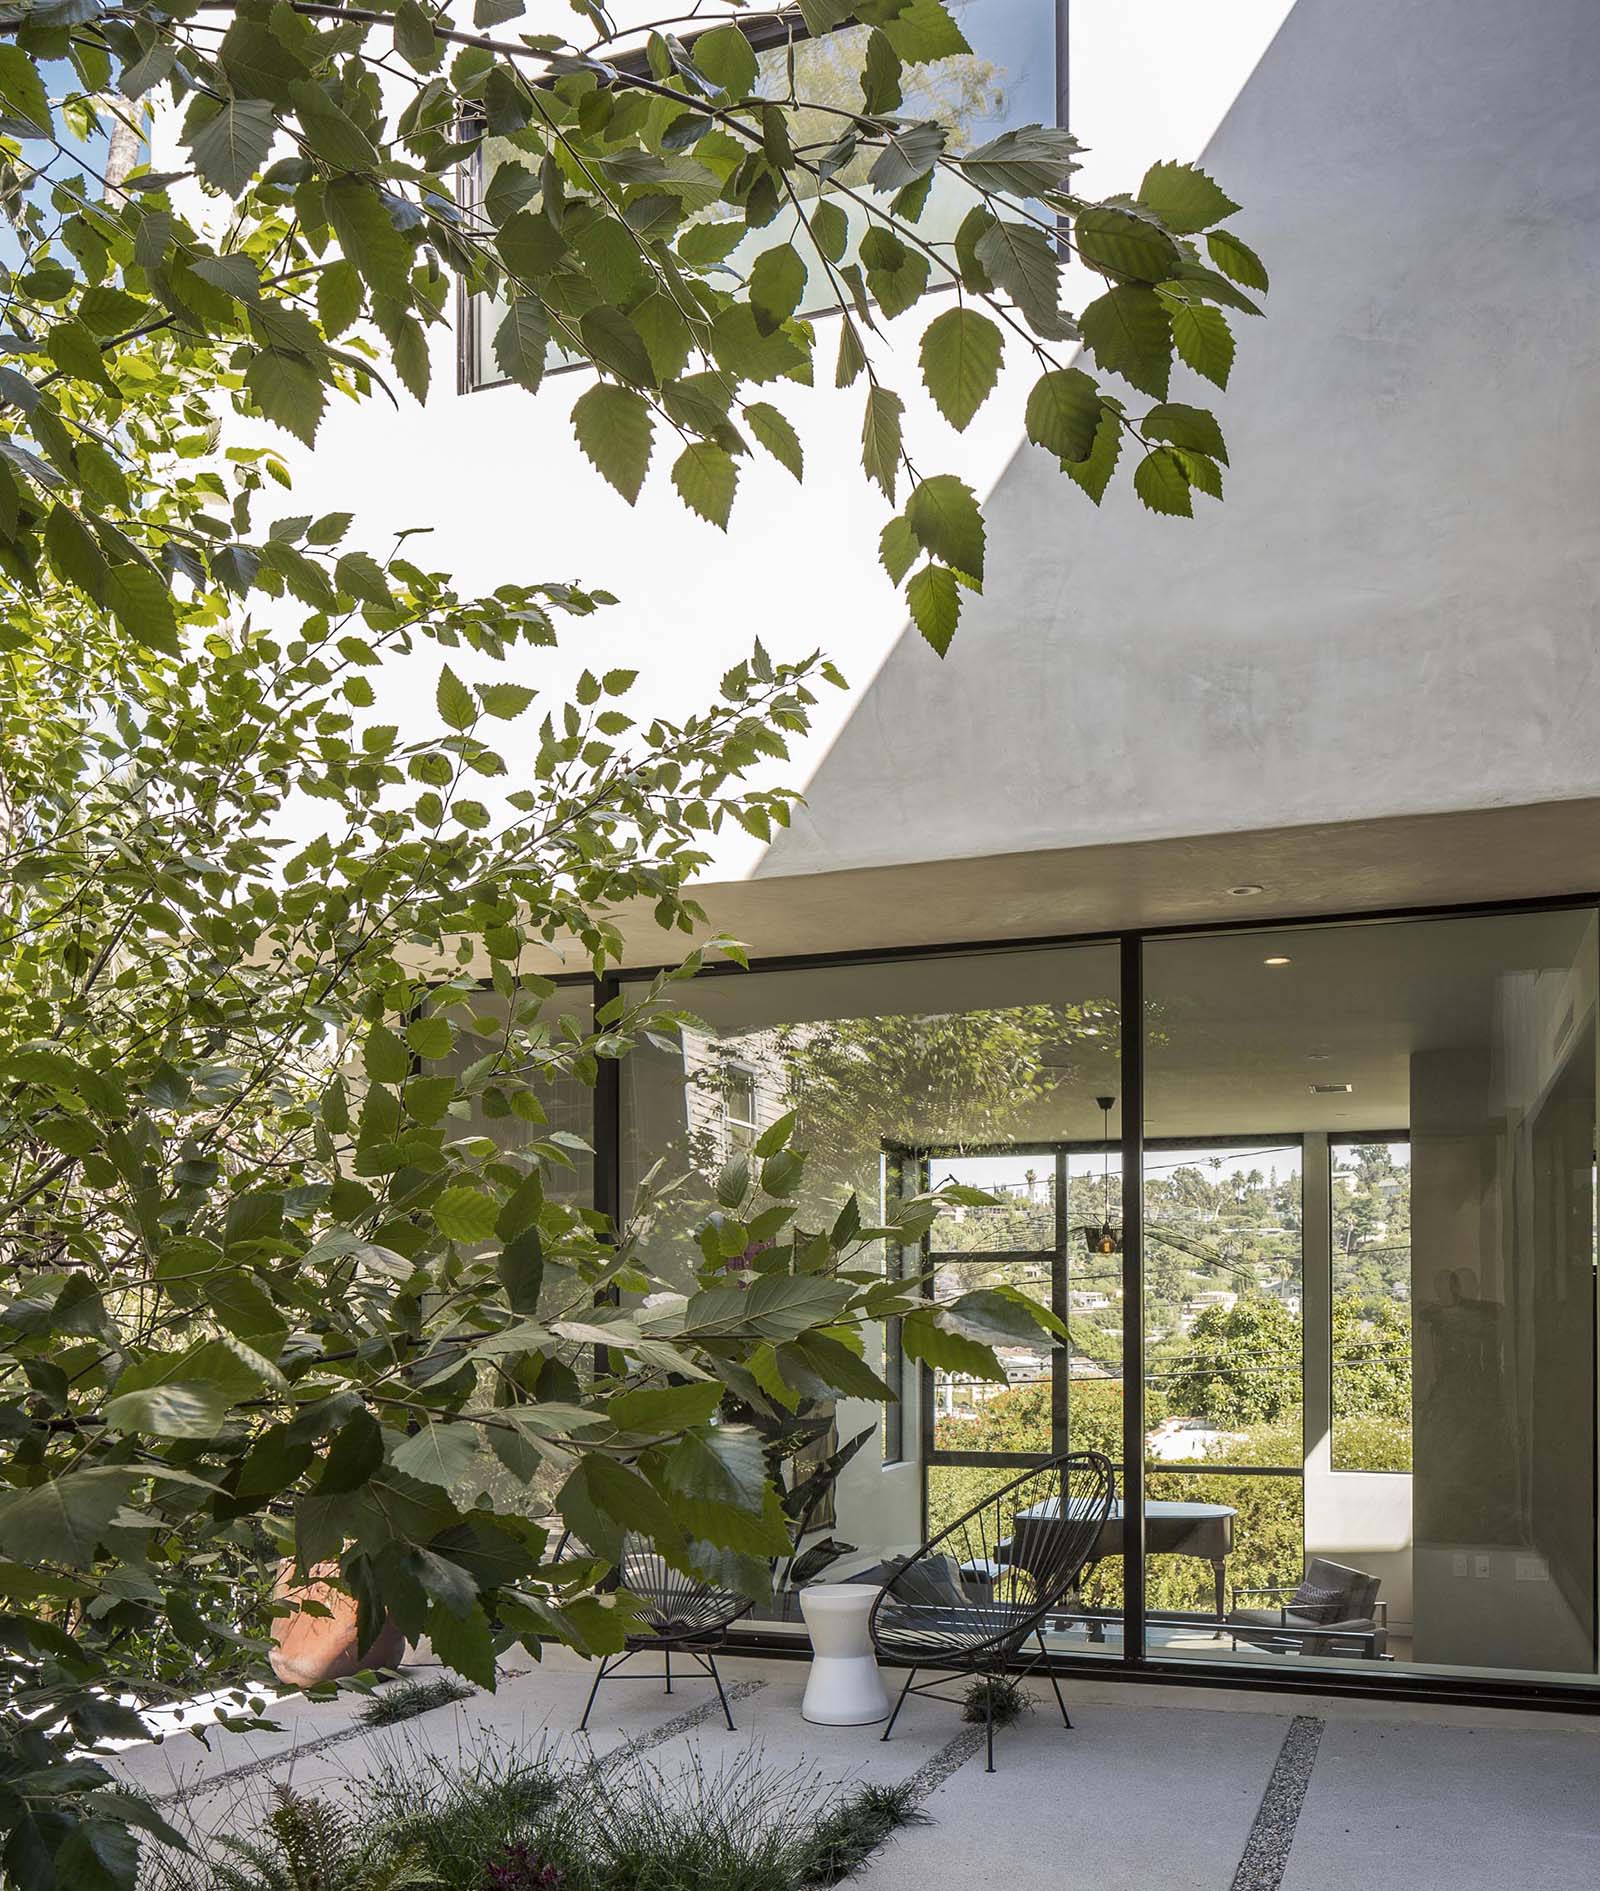 A modern courtyard with concrete pavers, pebbles, grasses, and a large tree.